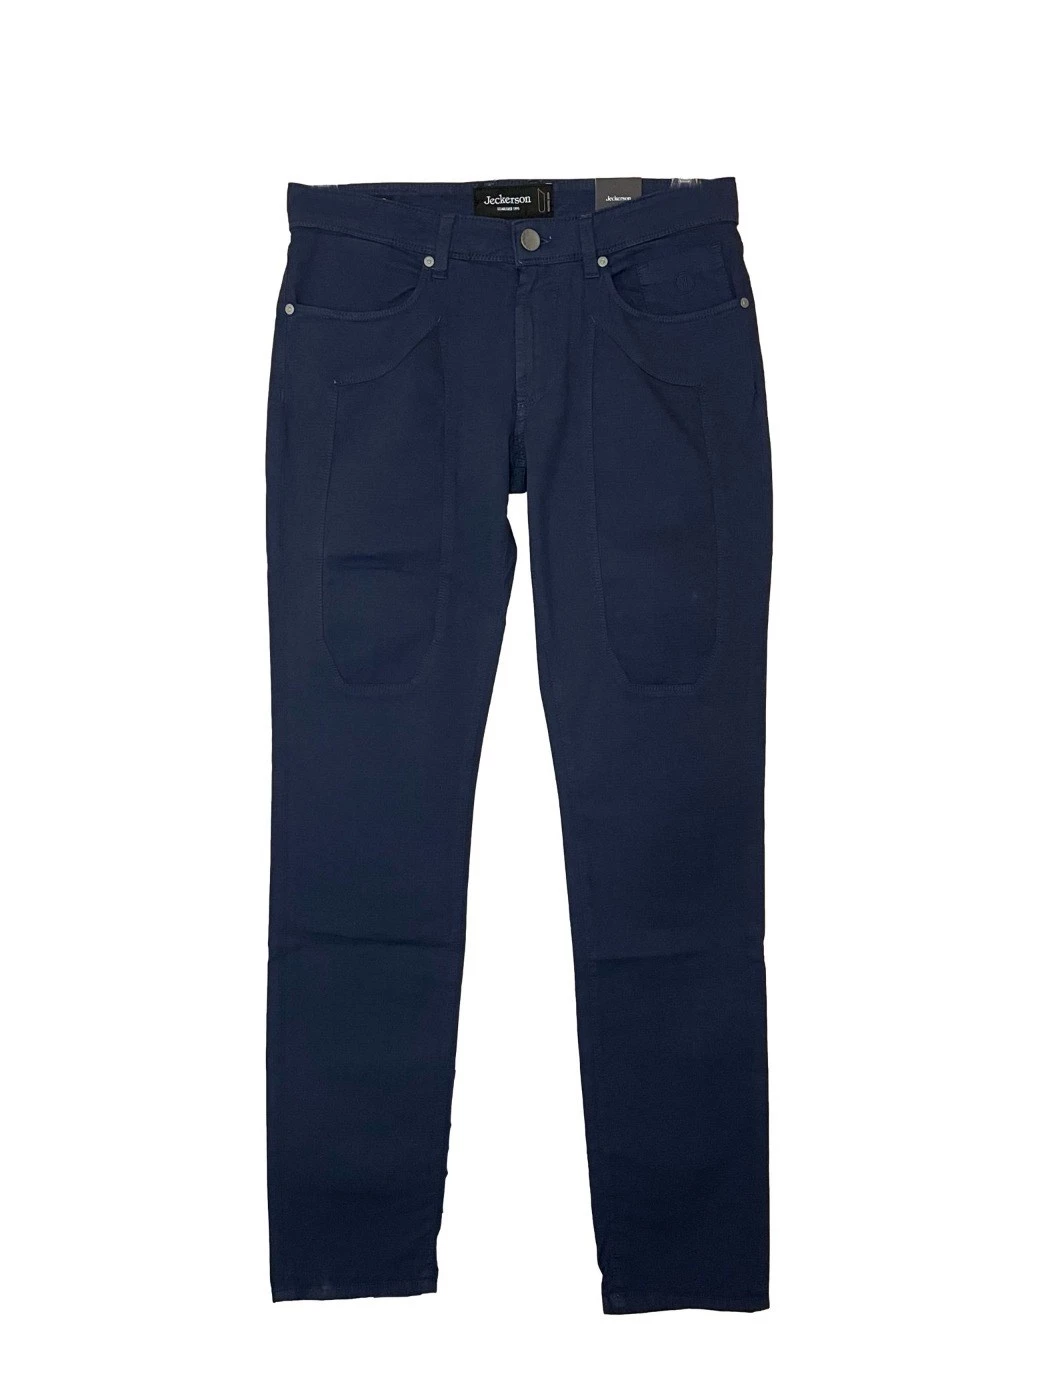 Trousers 5 pockets patch slim